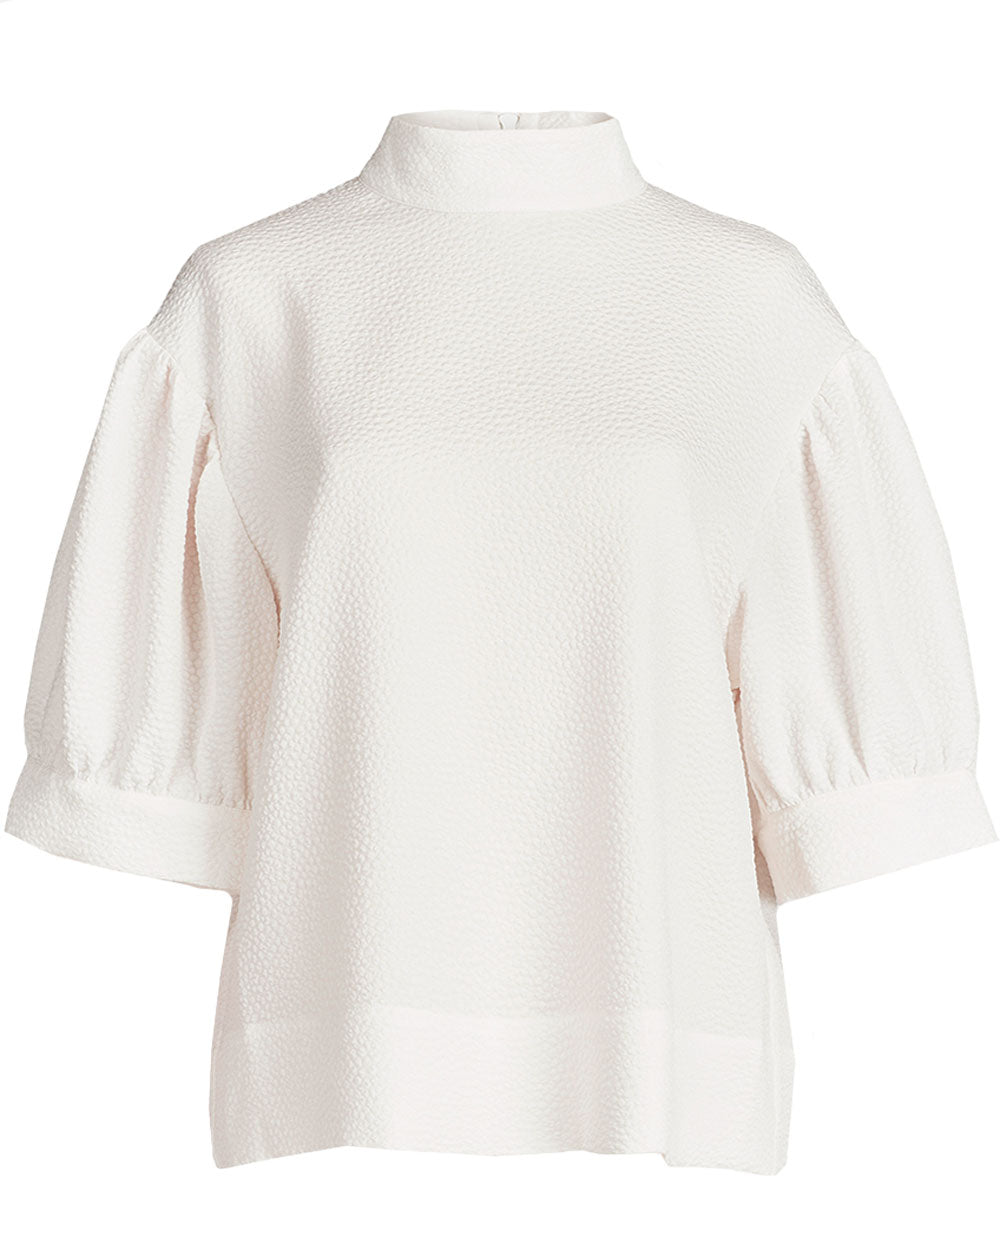 Off White Puff Sleeve Accessory Top